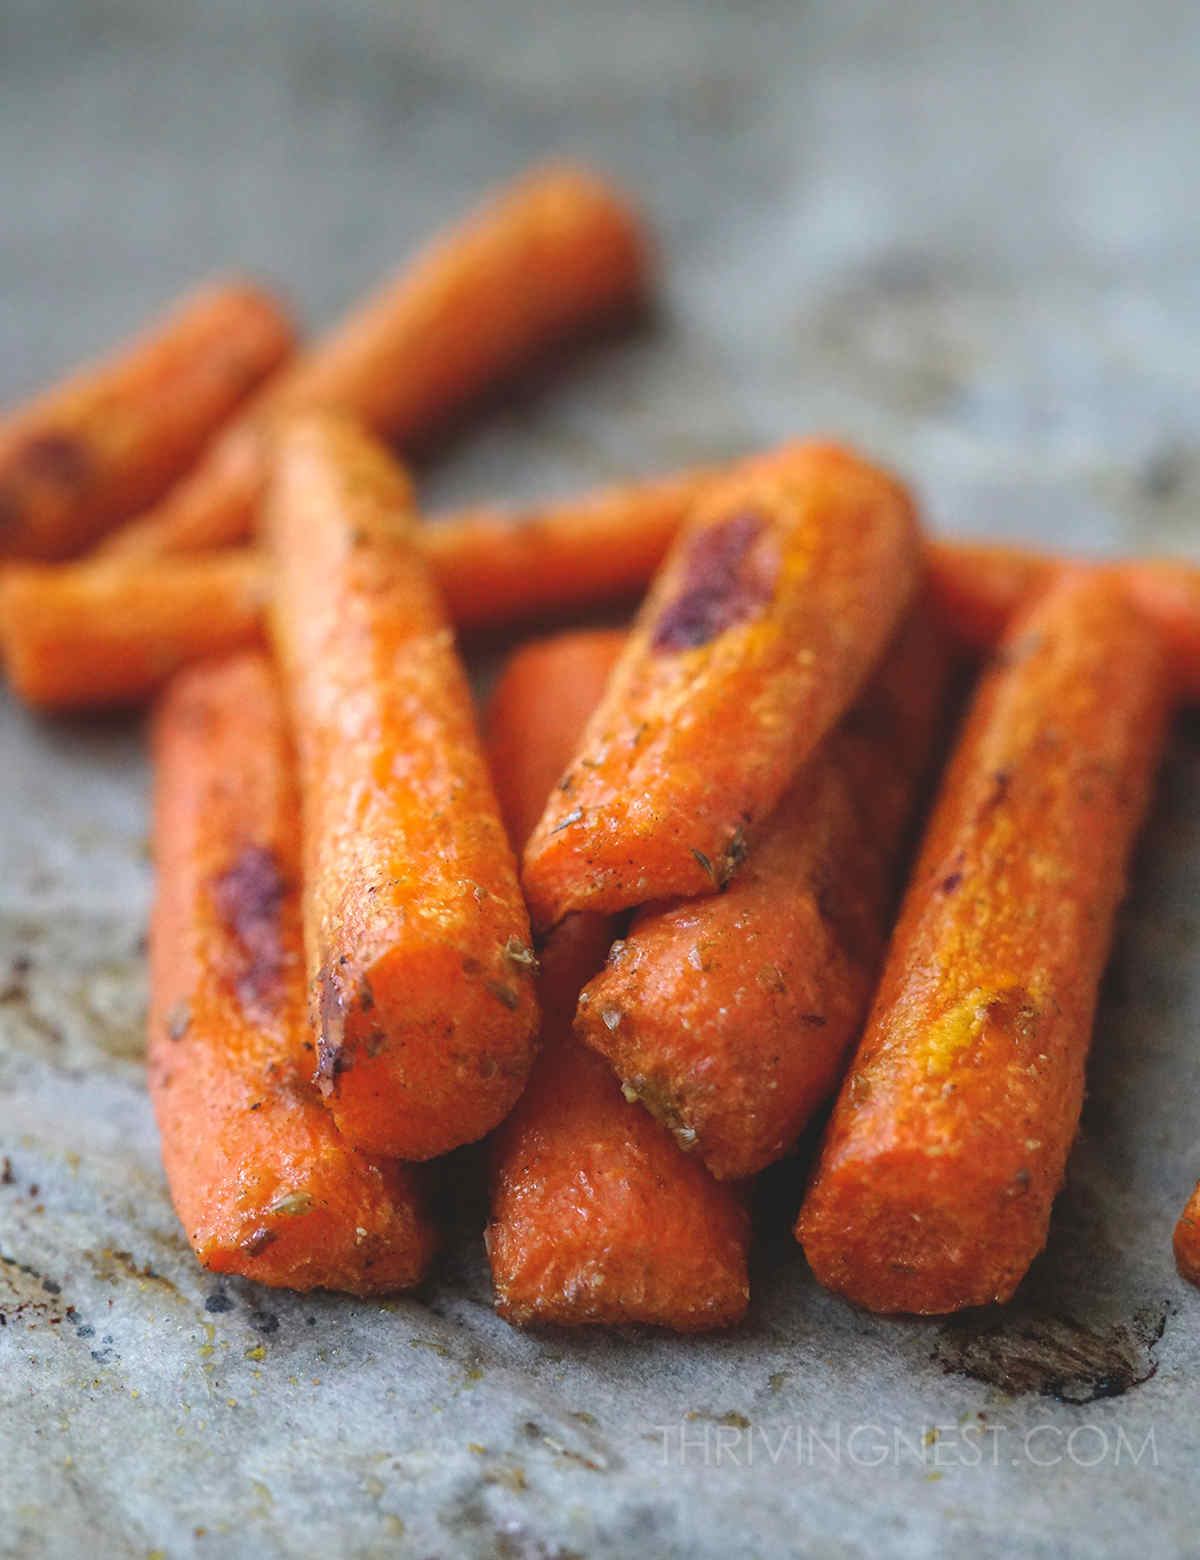 Roasted carrots for babies as finger food.